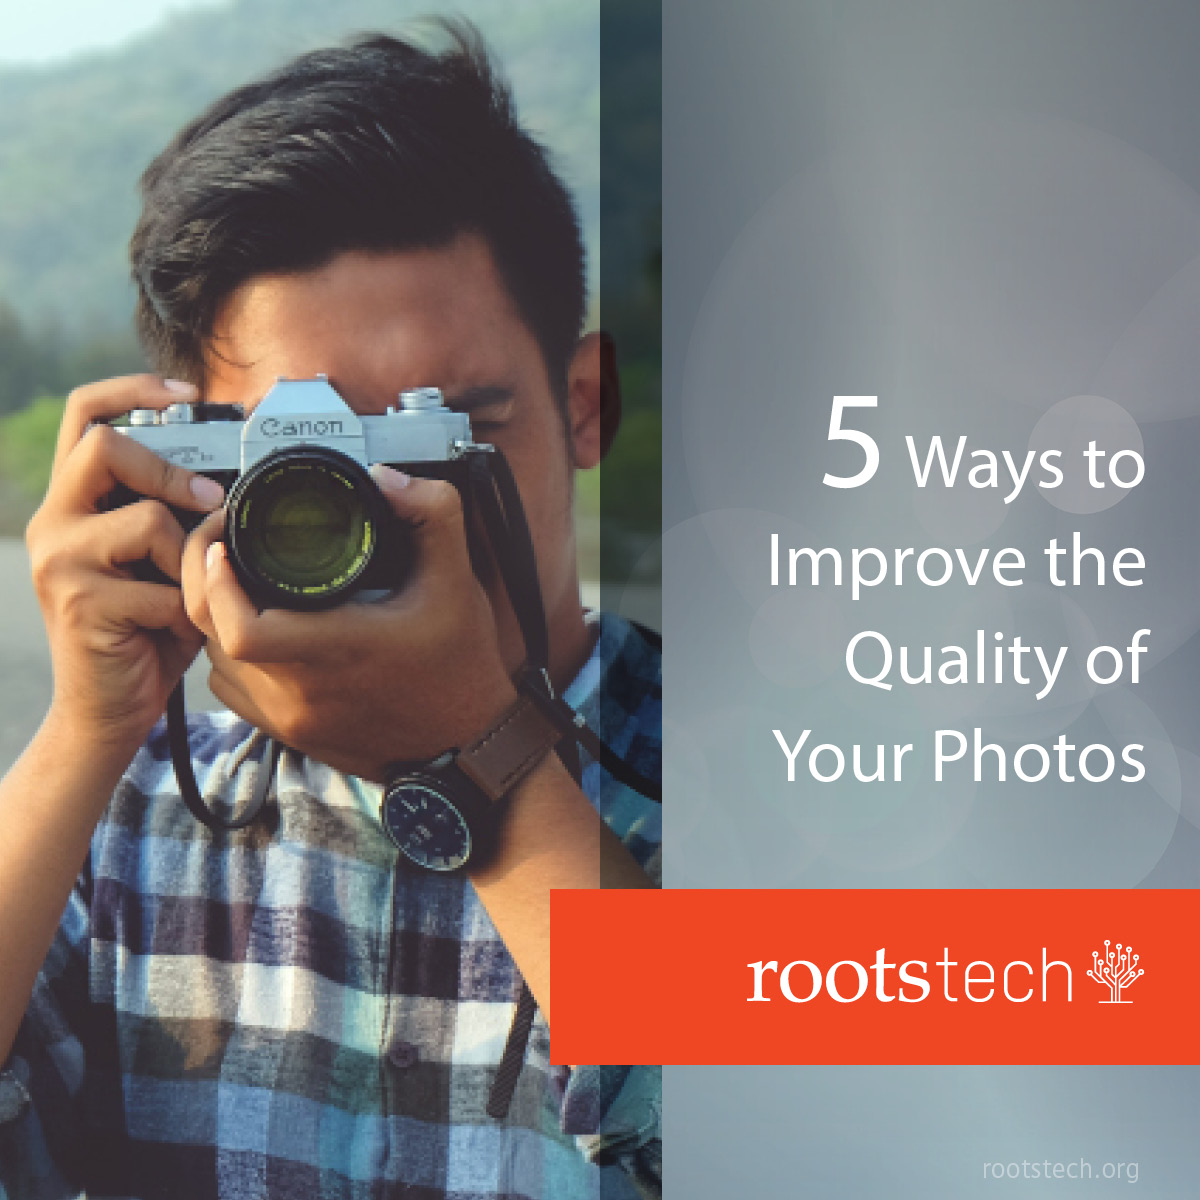 DO YOU KNOW THESE TRICKS TO IMPROVE THE QUALITY OF YOUR PHOTOS?